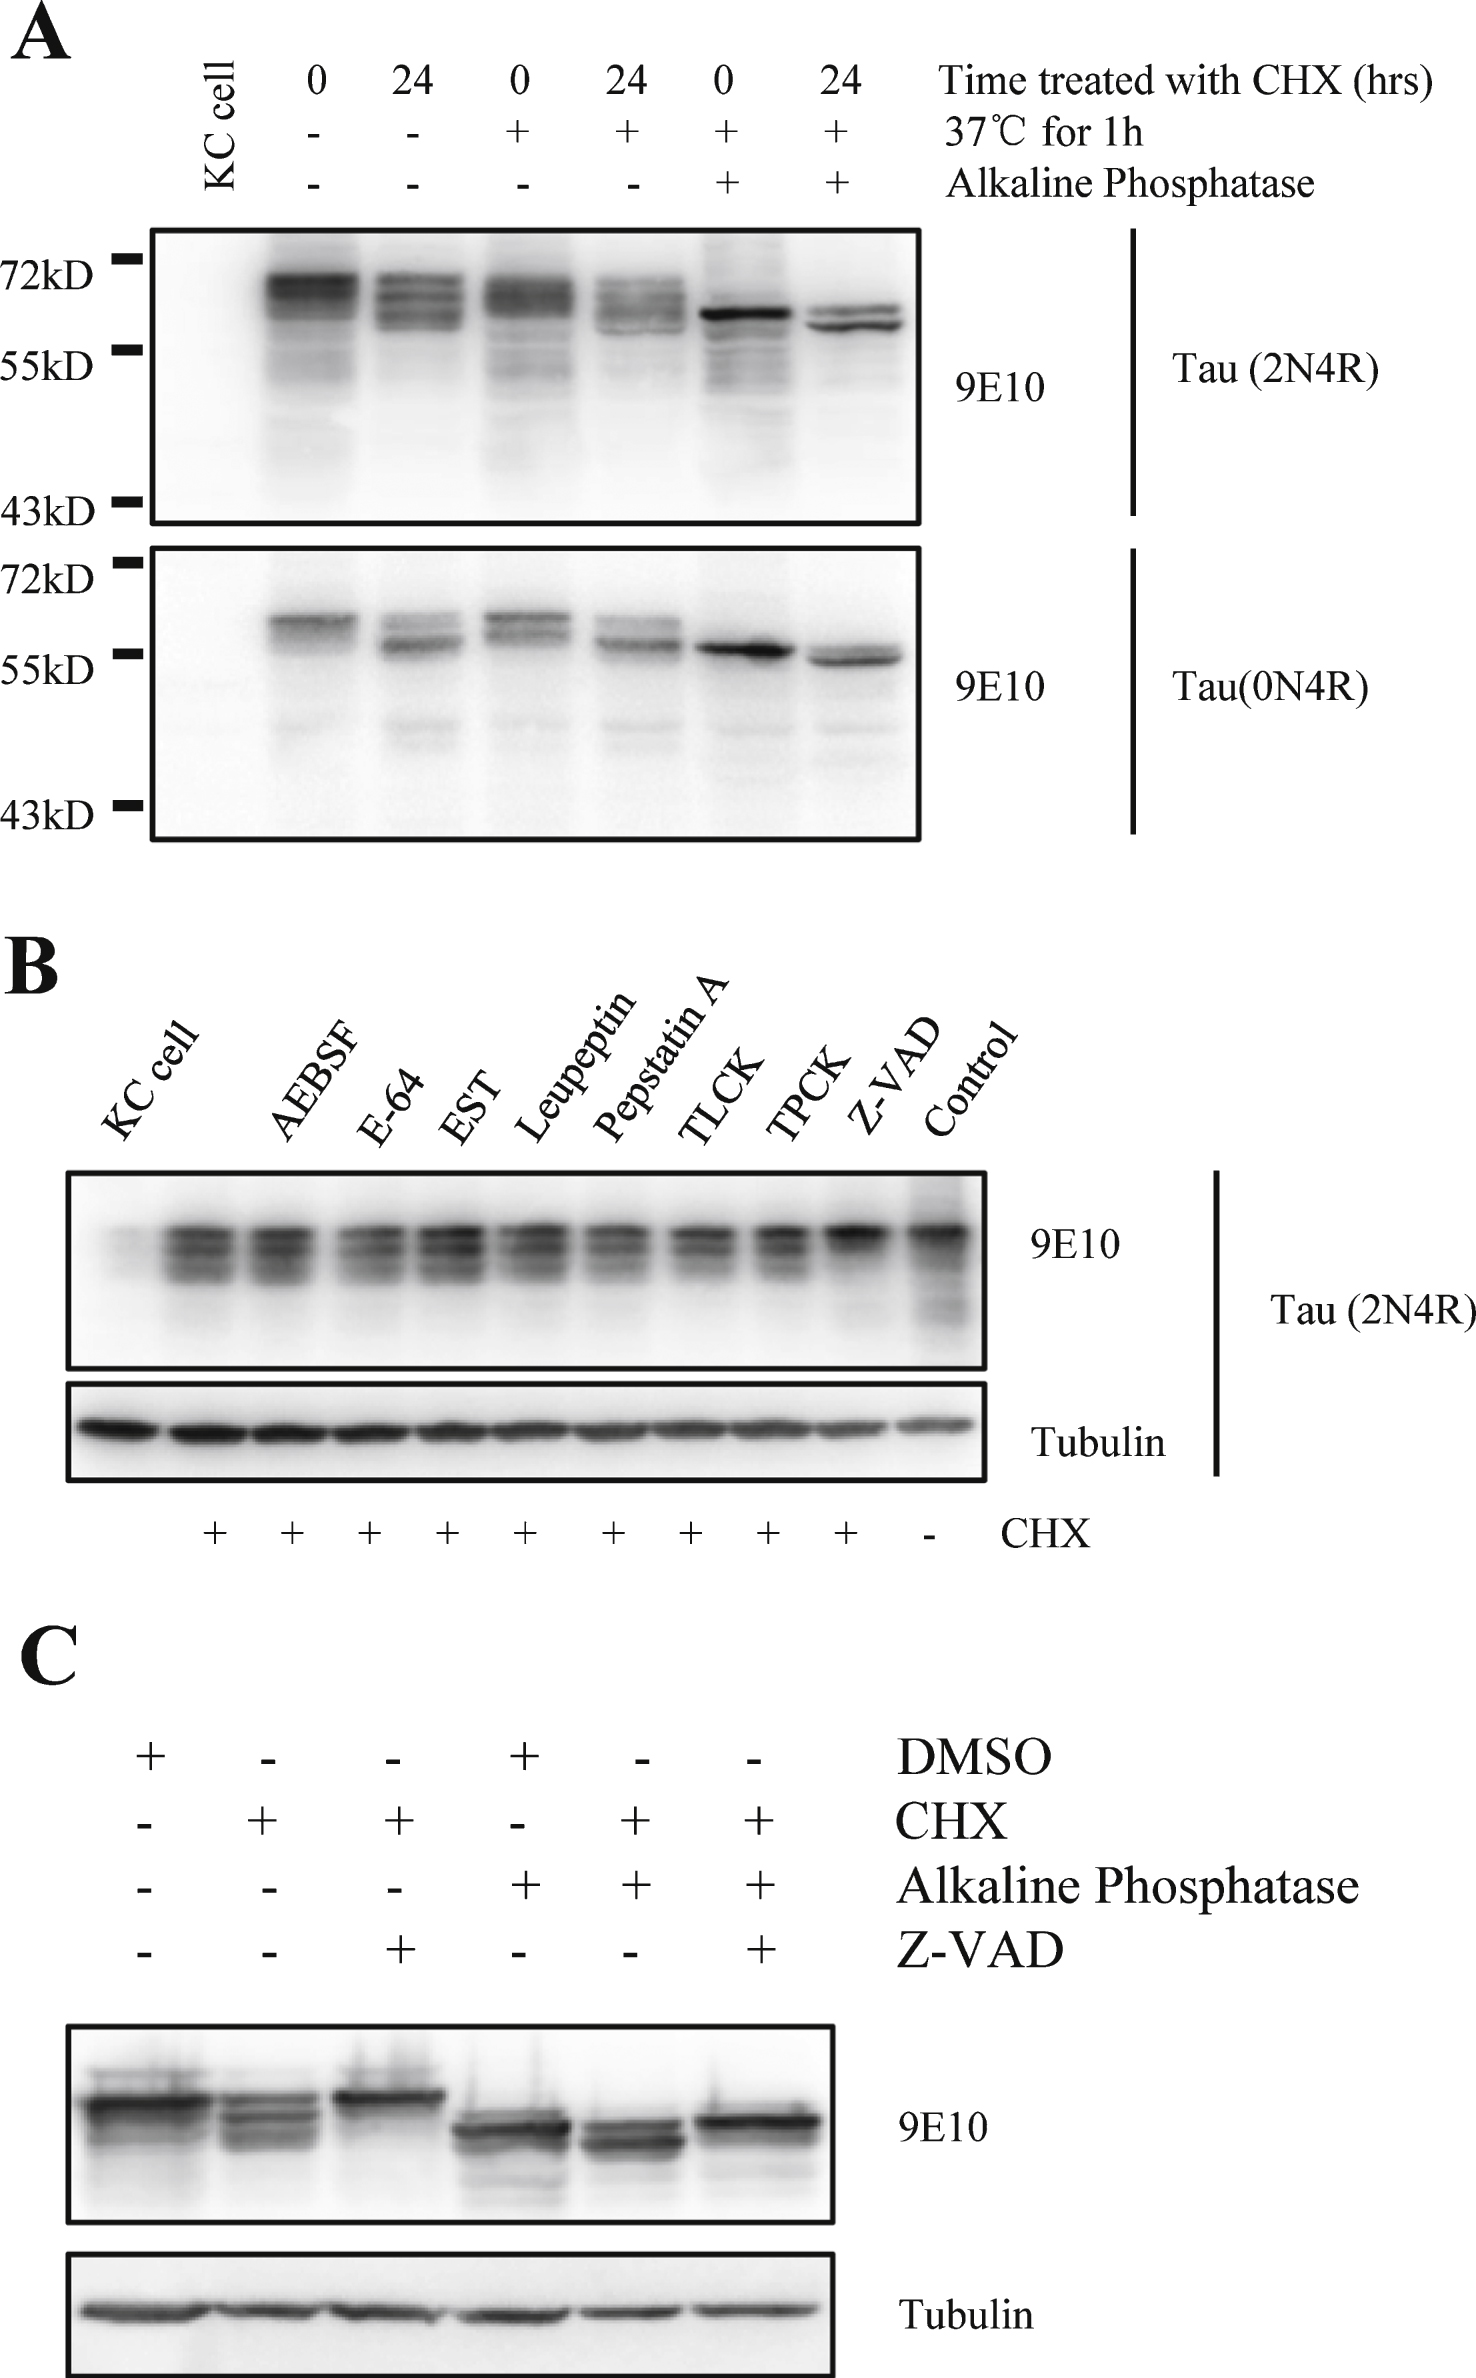 Tau can be truncated by protease during degradation and the truncation can be inhibited by caspase inhibitor. A) Western blot analysis of full-length human tau treated with alkaline phosphatase. At 48-h post transfection, Kc cells were treated with or without 100 μg/ml cycloheximide for 24 h, and the cell lysates were treated with or without alkaline phosphatase at 37°C for 1 h. B) Western blot analysis of full-length human tau in Drosophila Kc cells treated with different protease inhibitors in the presence of cycloheximide (100 μg/ml). At 48-h post transfection, Kc cells were treated with 100 μg/ml cycloheximide and protease inhibitors for 24 h. C) Alkaline phosphatase treatment of full-length human tau from cycloheximide-treated Drosophila Kc cells in the presence or absence of caspase inhibitor Z-VAD. At 48-h post transfection, Kc cells were treated with 100 μg/ml cycloheximide and Z-VAD for 24 h, then the cell lysates were treated with or without alkaline phosphatase at 37°C for 1 h.